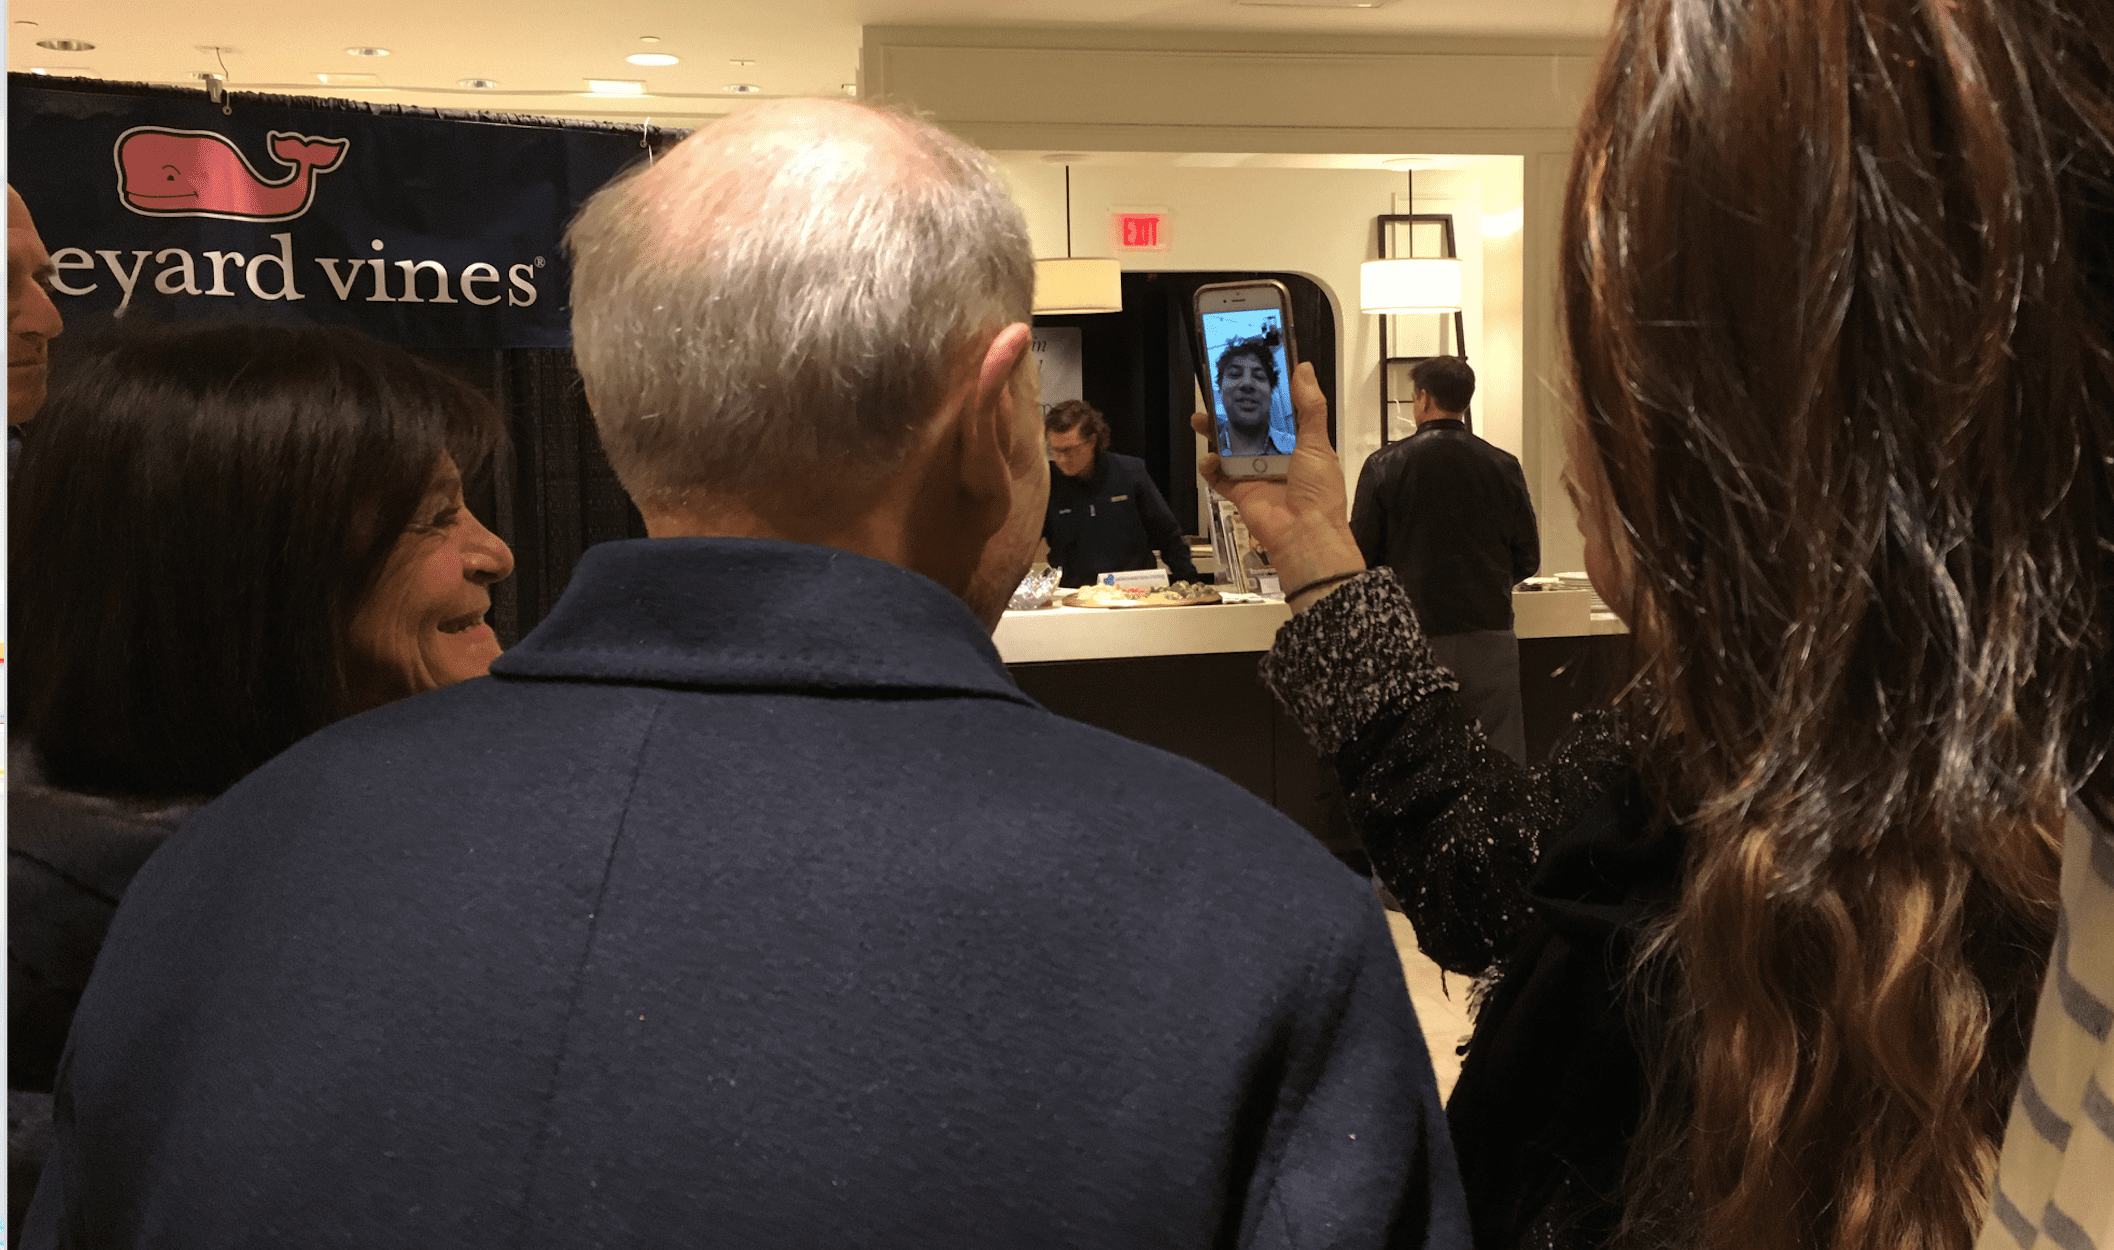 The Epstein family video-chatted with their son and author Joseph Epstein at the We-Hap Pop-Up Store. Joseph’s book “Aromas in Coffee” is available at the store. Photo credit: Joy Taylor